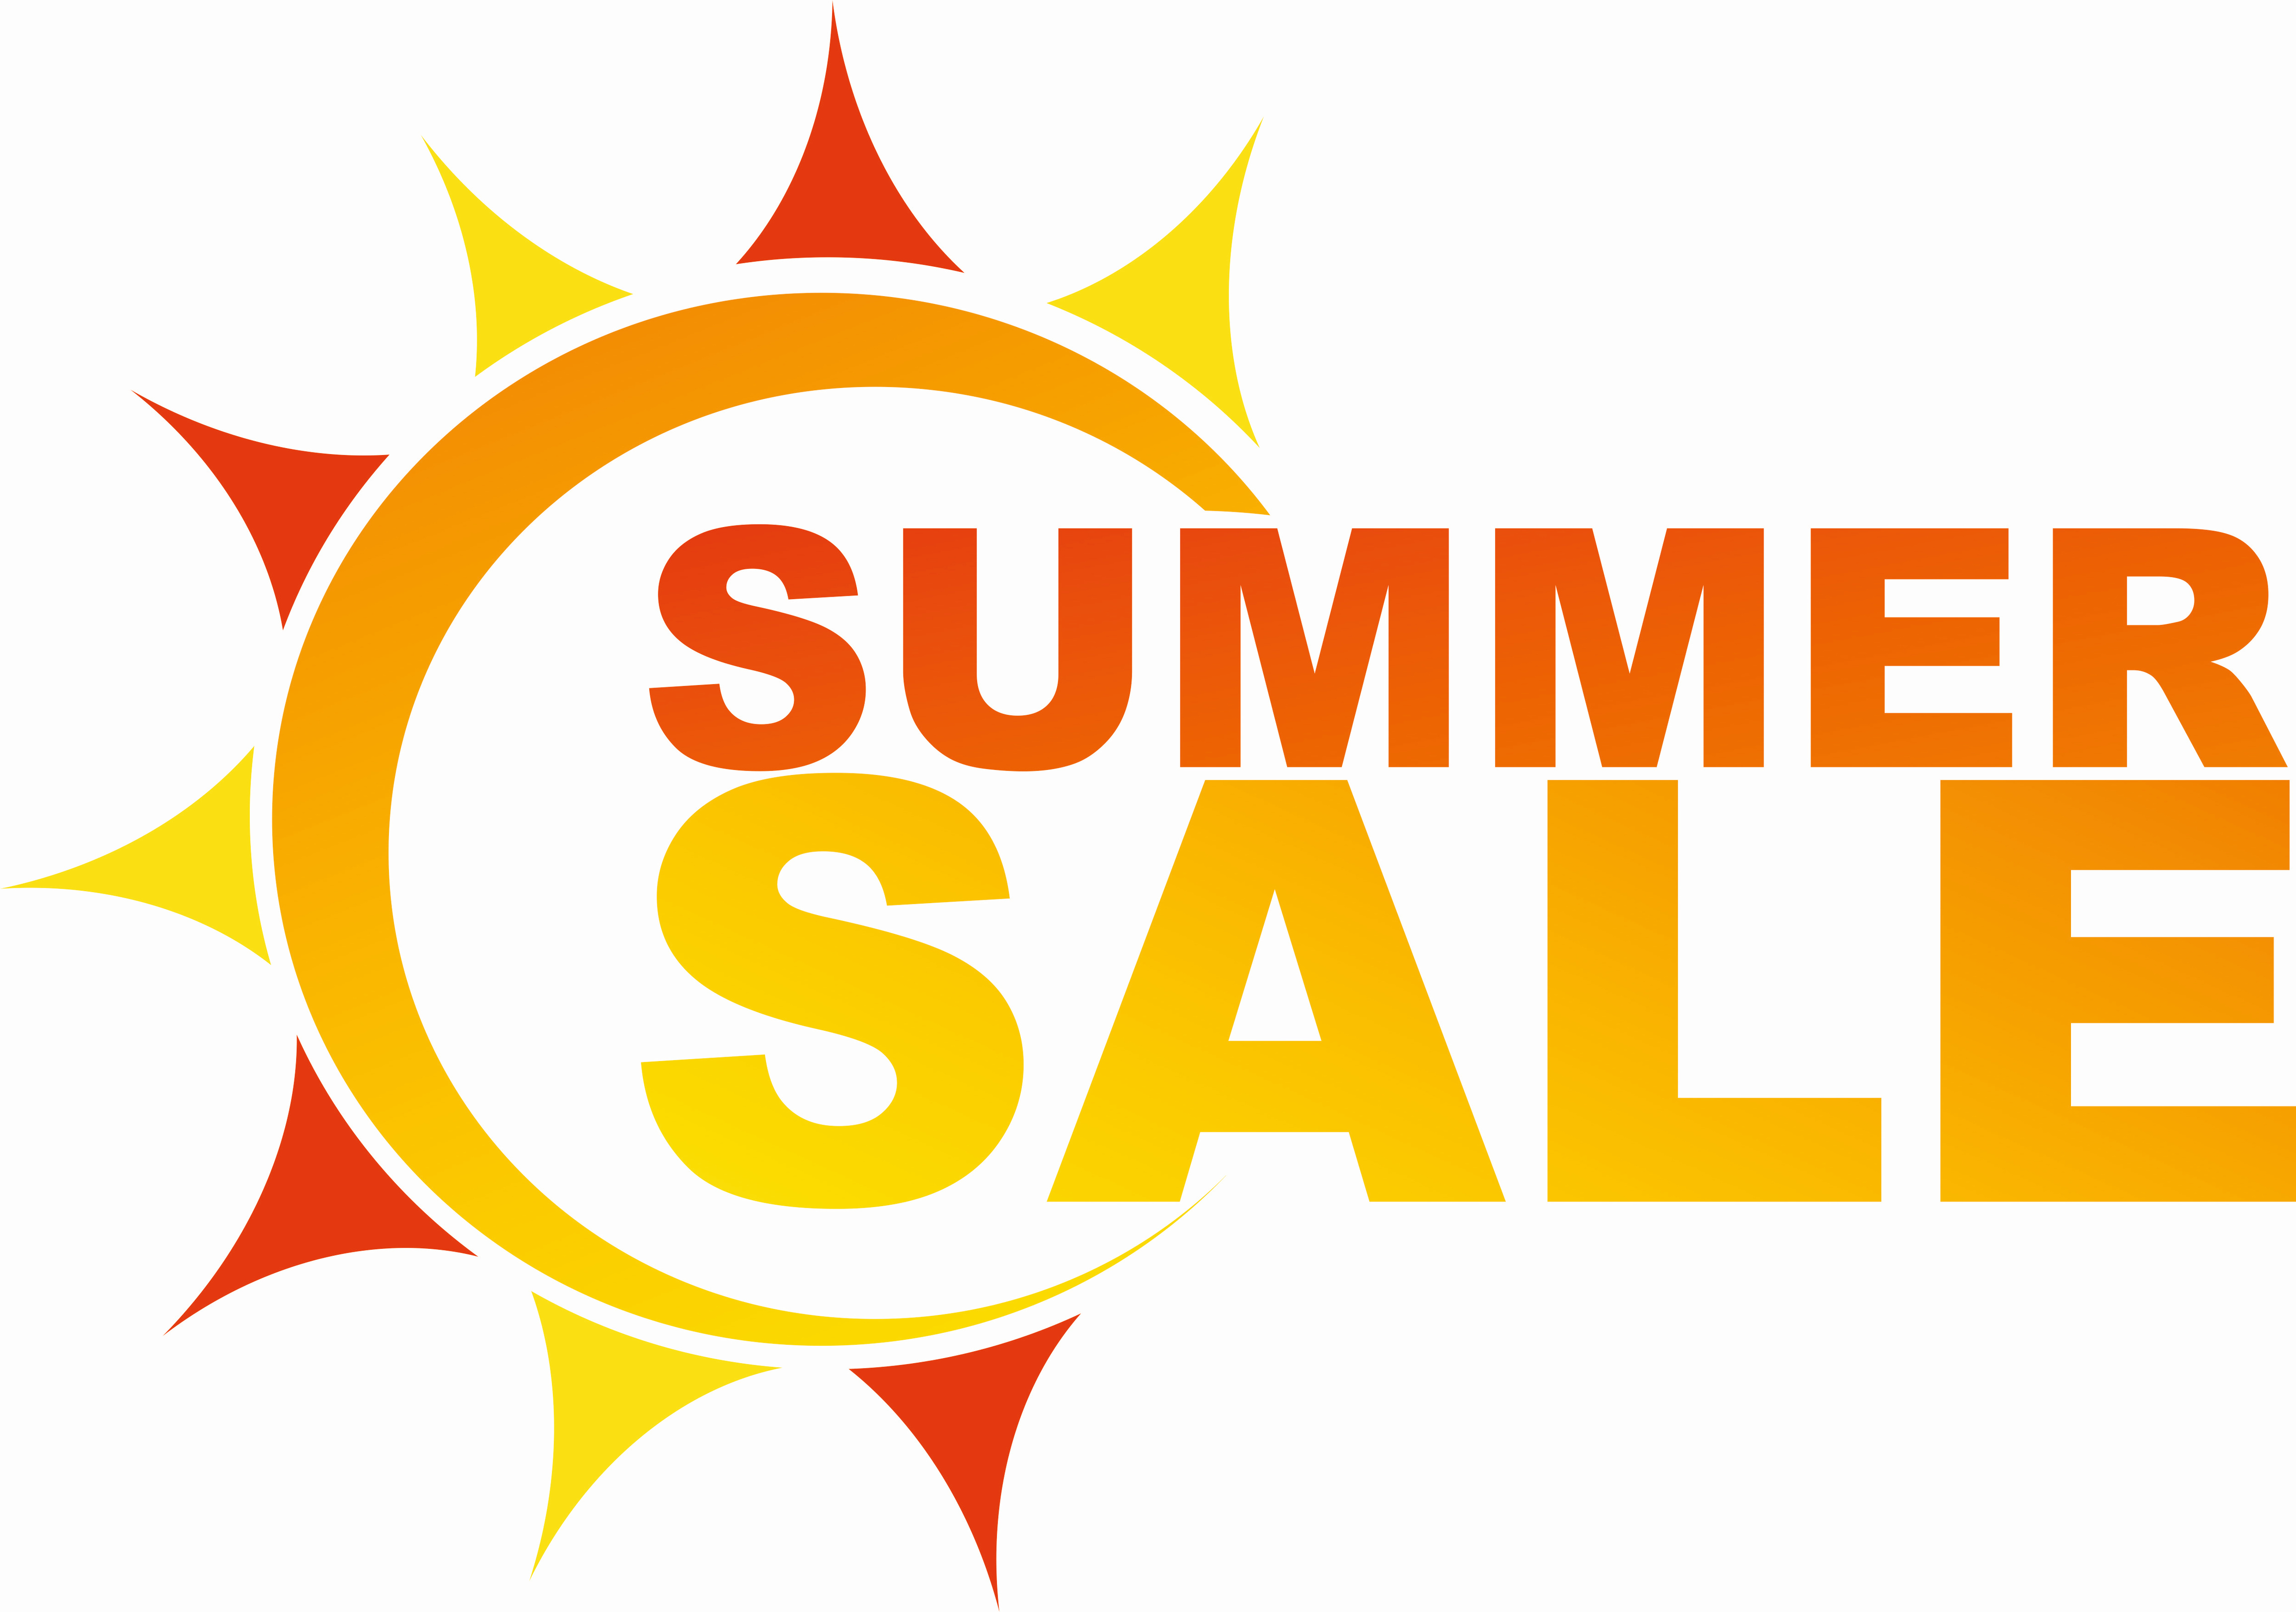 Don’t Sweat the Summer: Sales Promotions, Free Training Available header